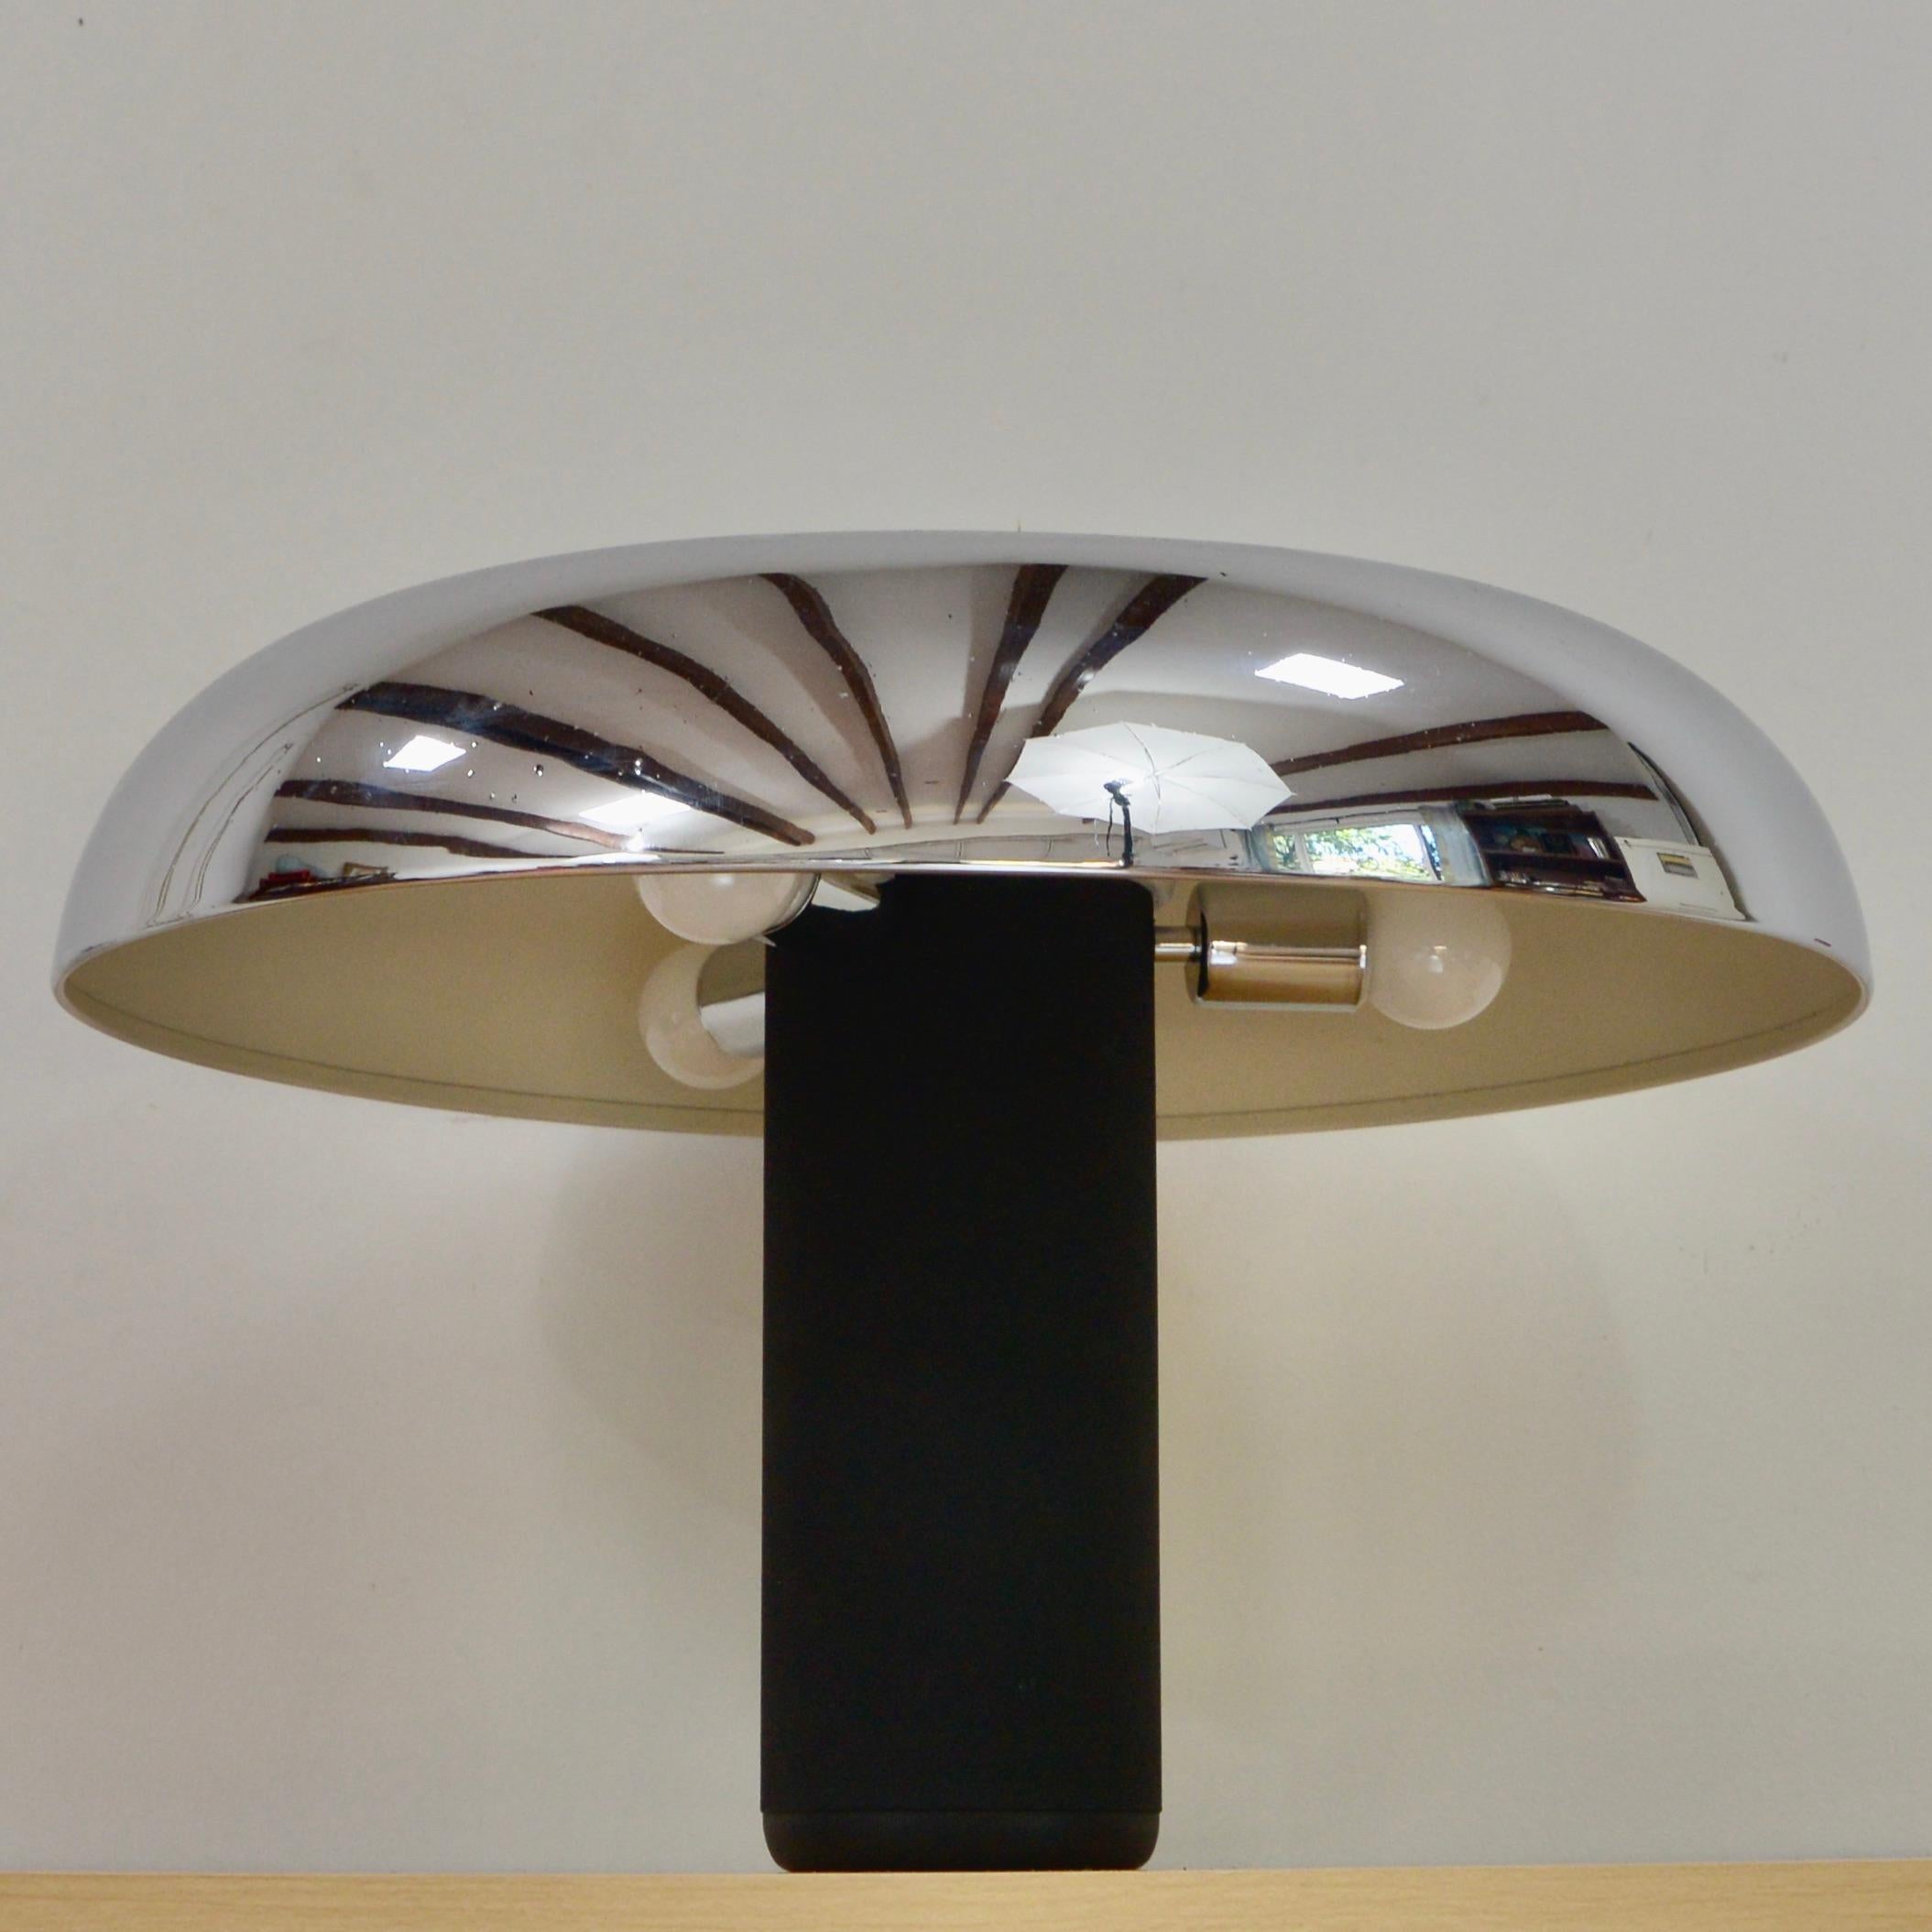 Single Lumenform table lamp from 1970s Italy. IN chrome plated aluminum and black textured steel. Fully rewired with three (3) E26 medium based sockets, ready to be used in the USA.
Measurements:
Height 15”
Diameter 21”.